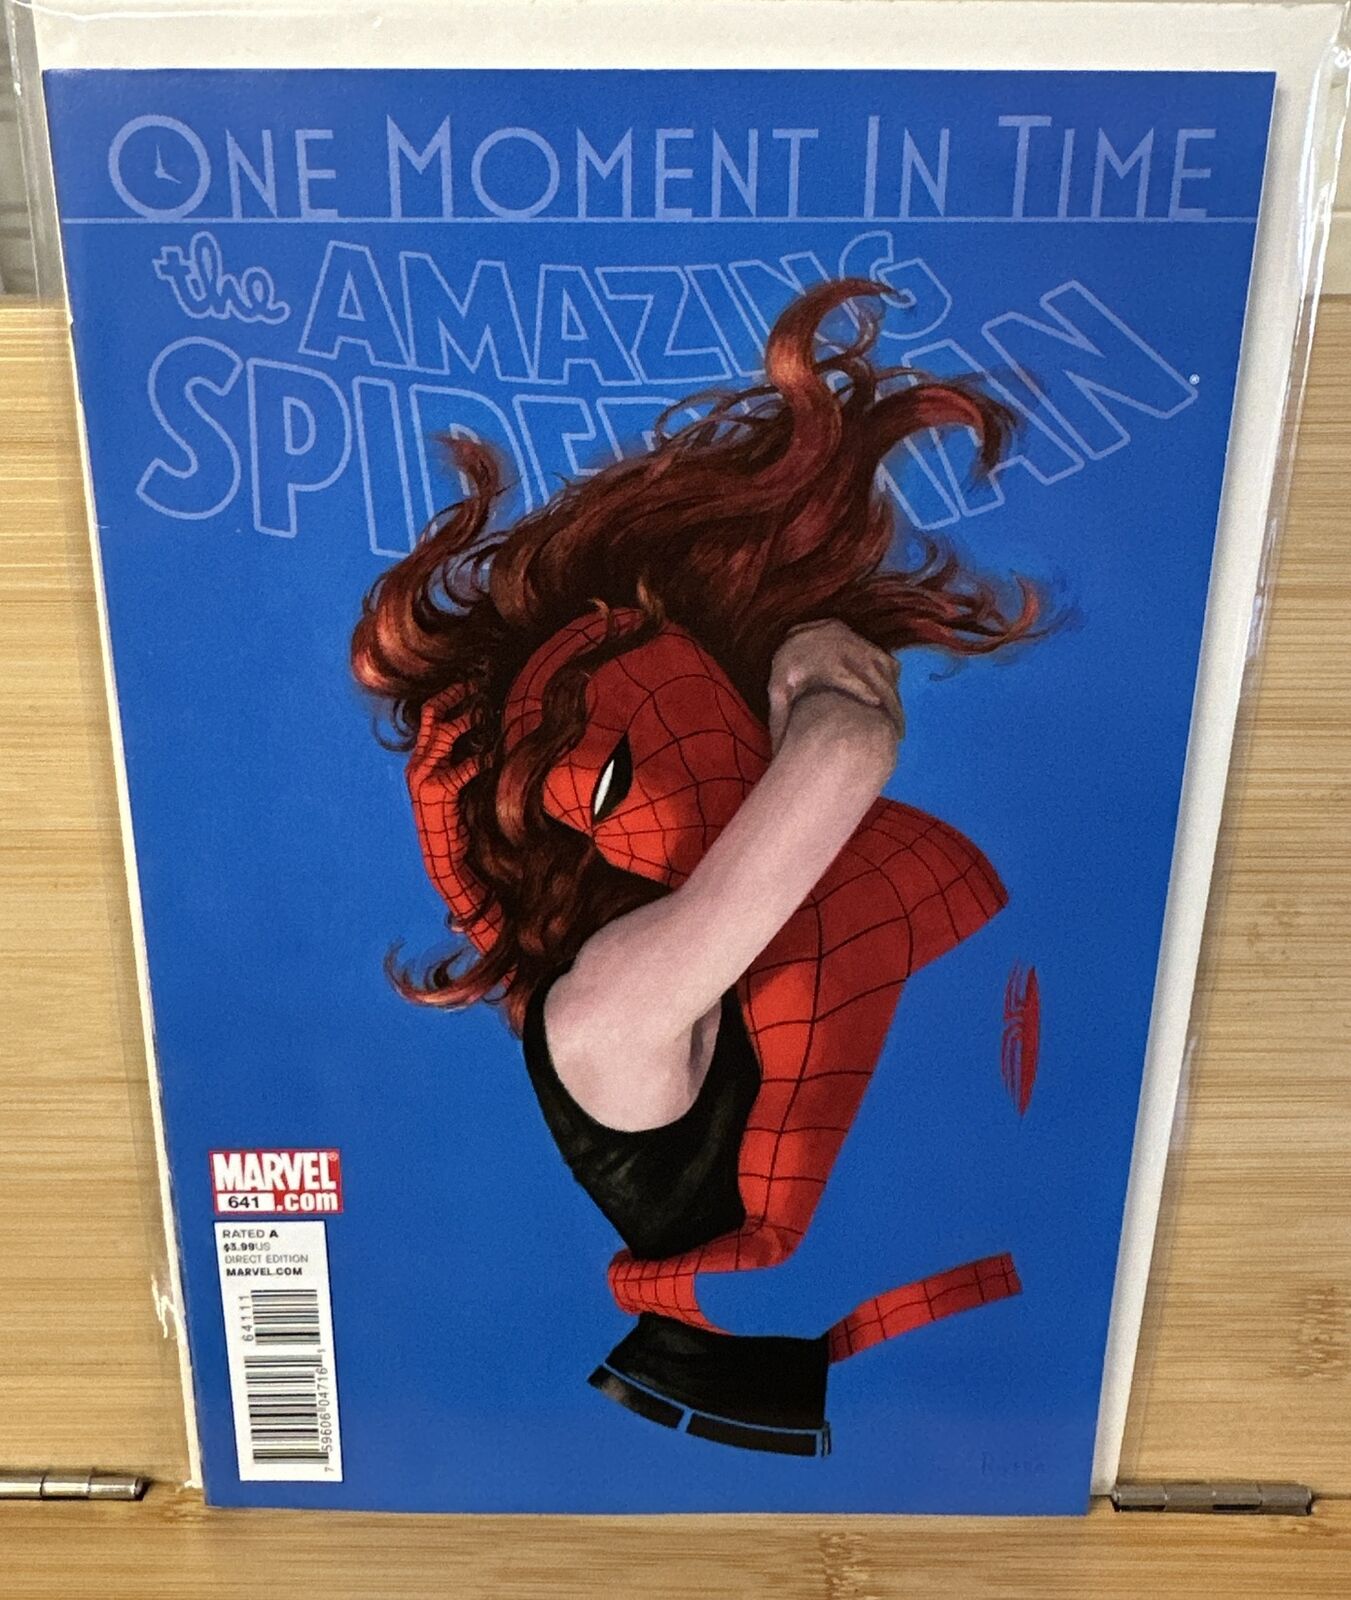 THE AMAZING SPIDER-MAN #641 ONE MOMENT IN TIME / VF + TO NM